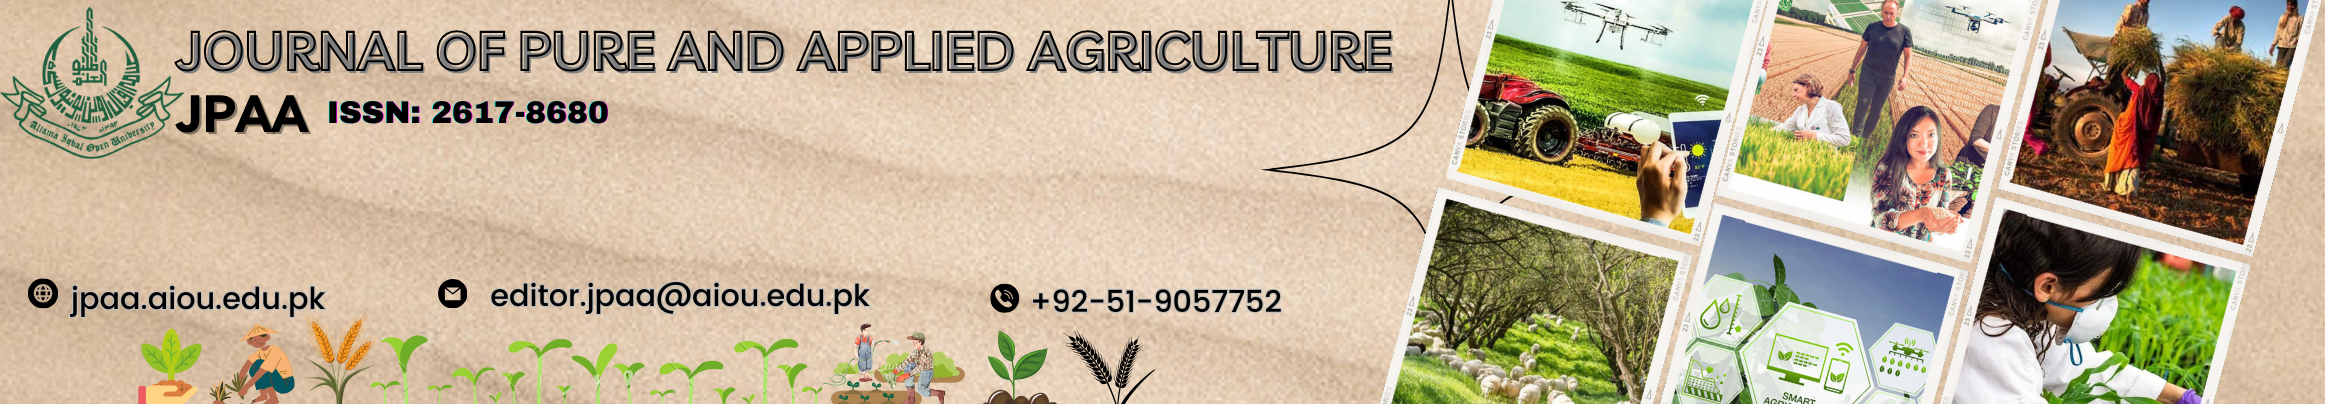 Journal of pure and applied agriculture